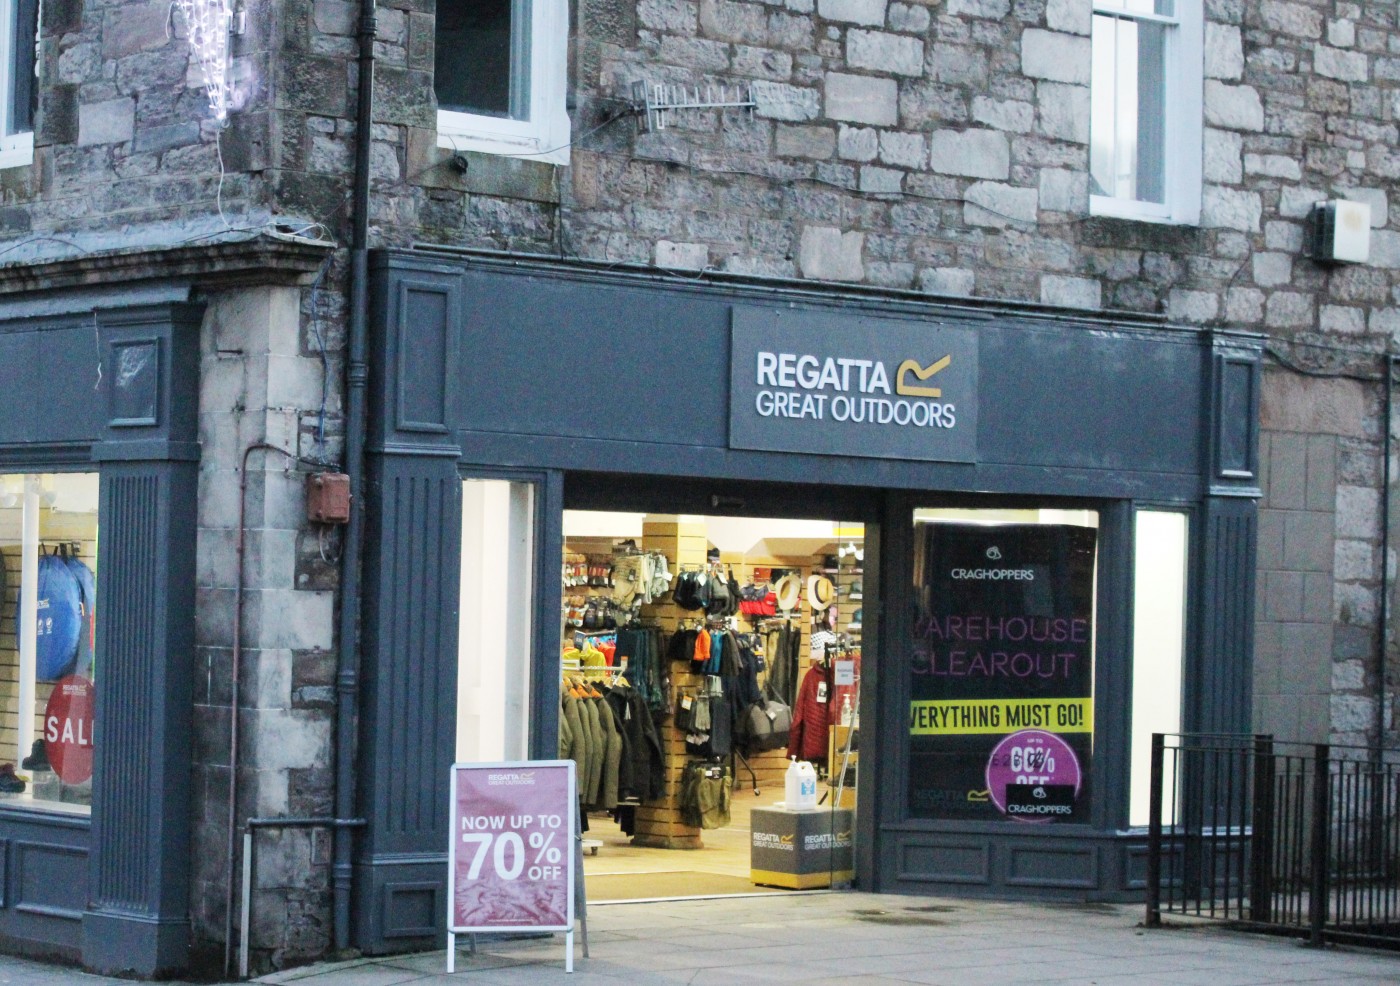 Regatta Great Outdoors clothing shop in Pitlochry town centre